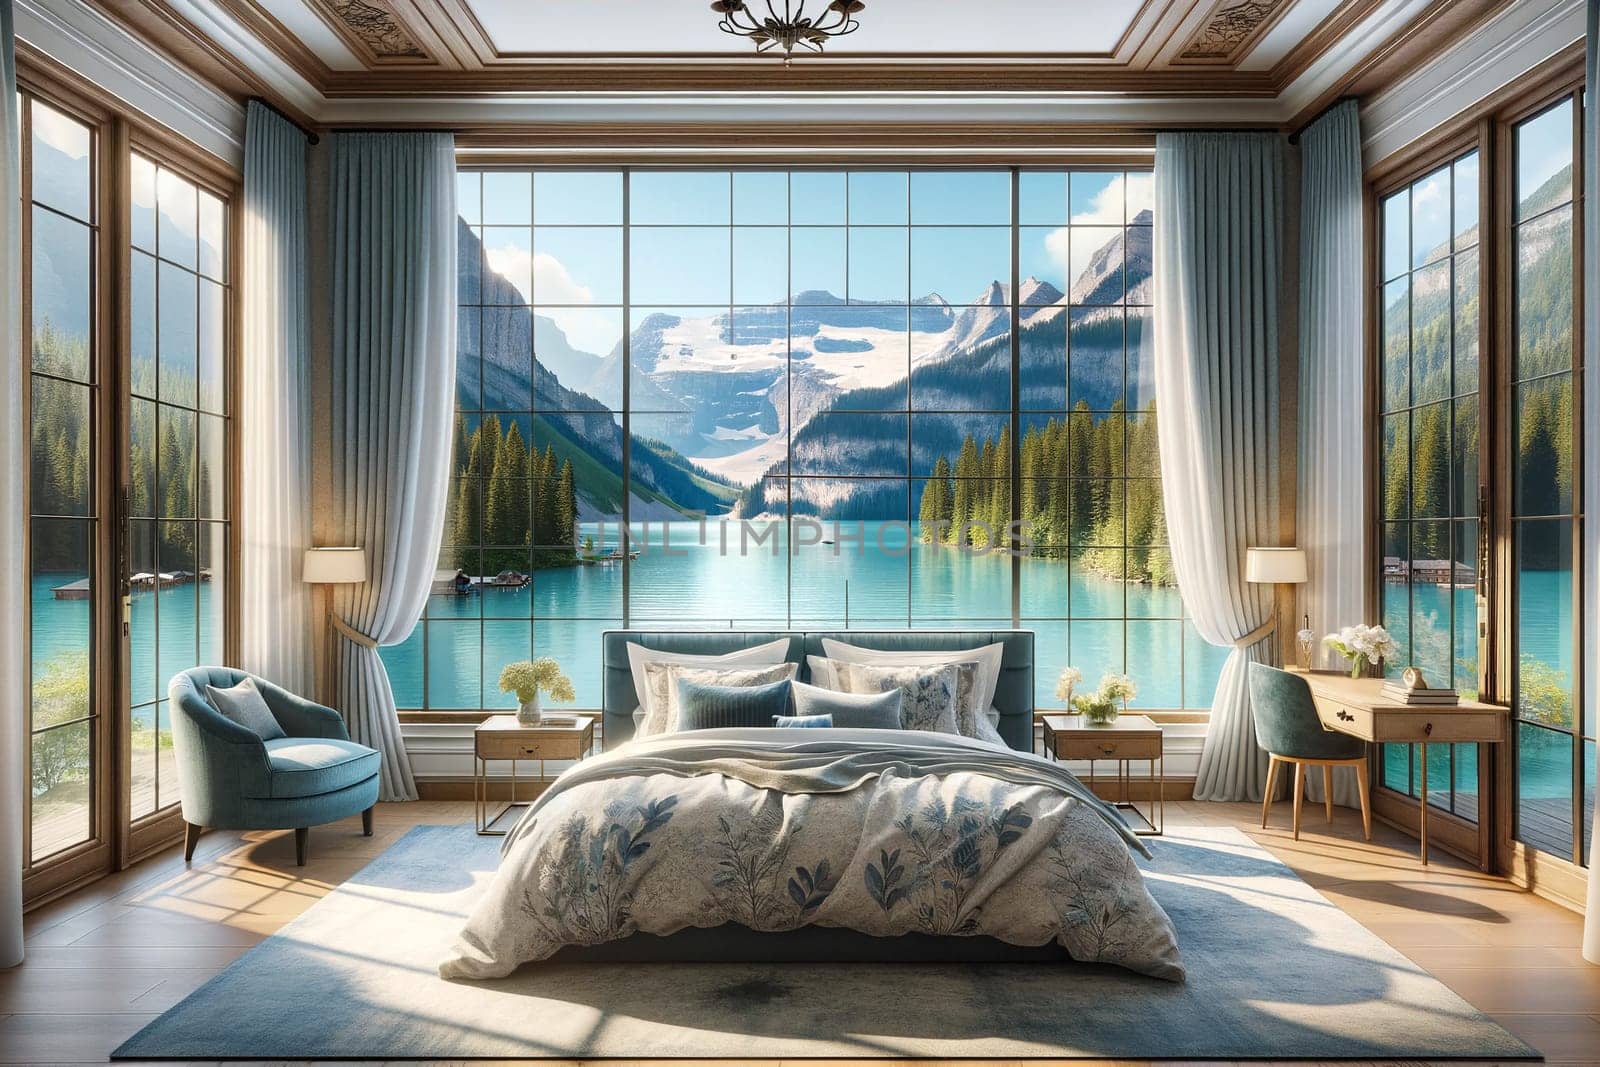 Bedroom interior with glass walls and views of the mountains and lake.